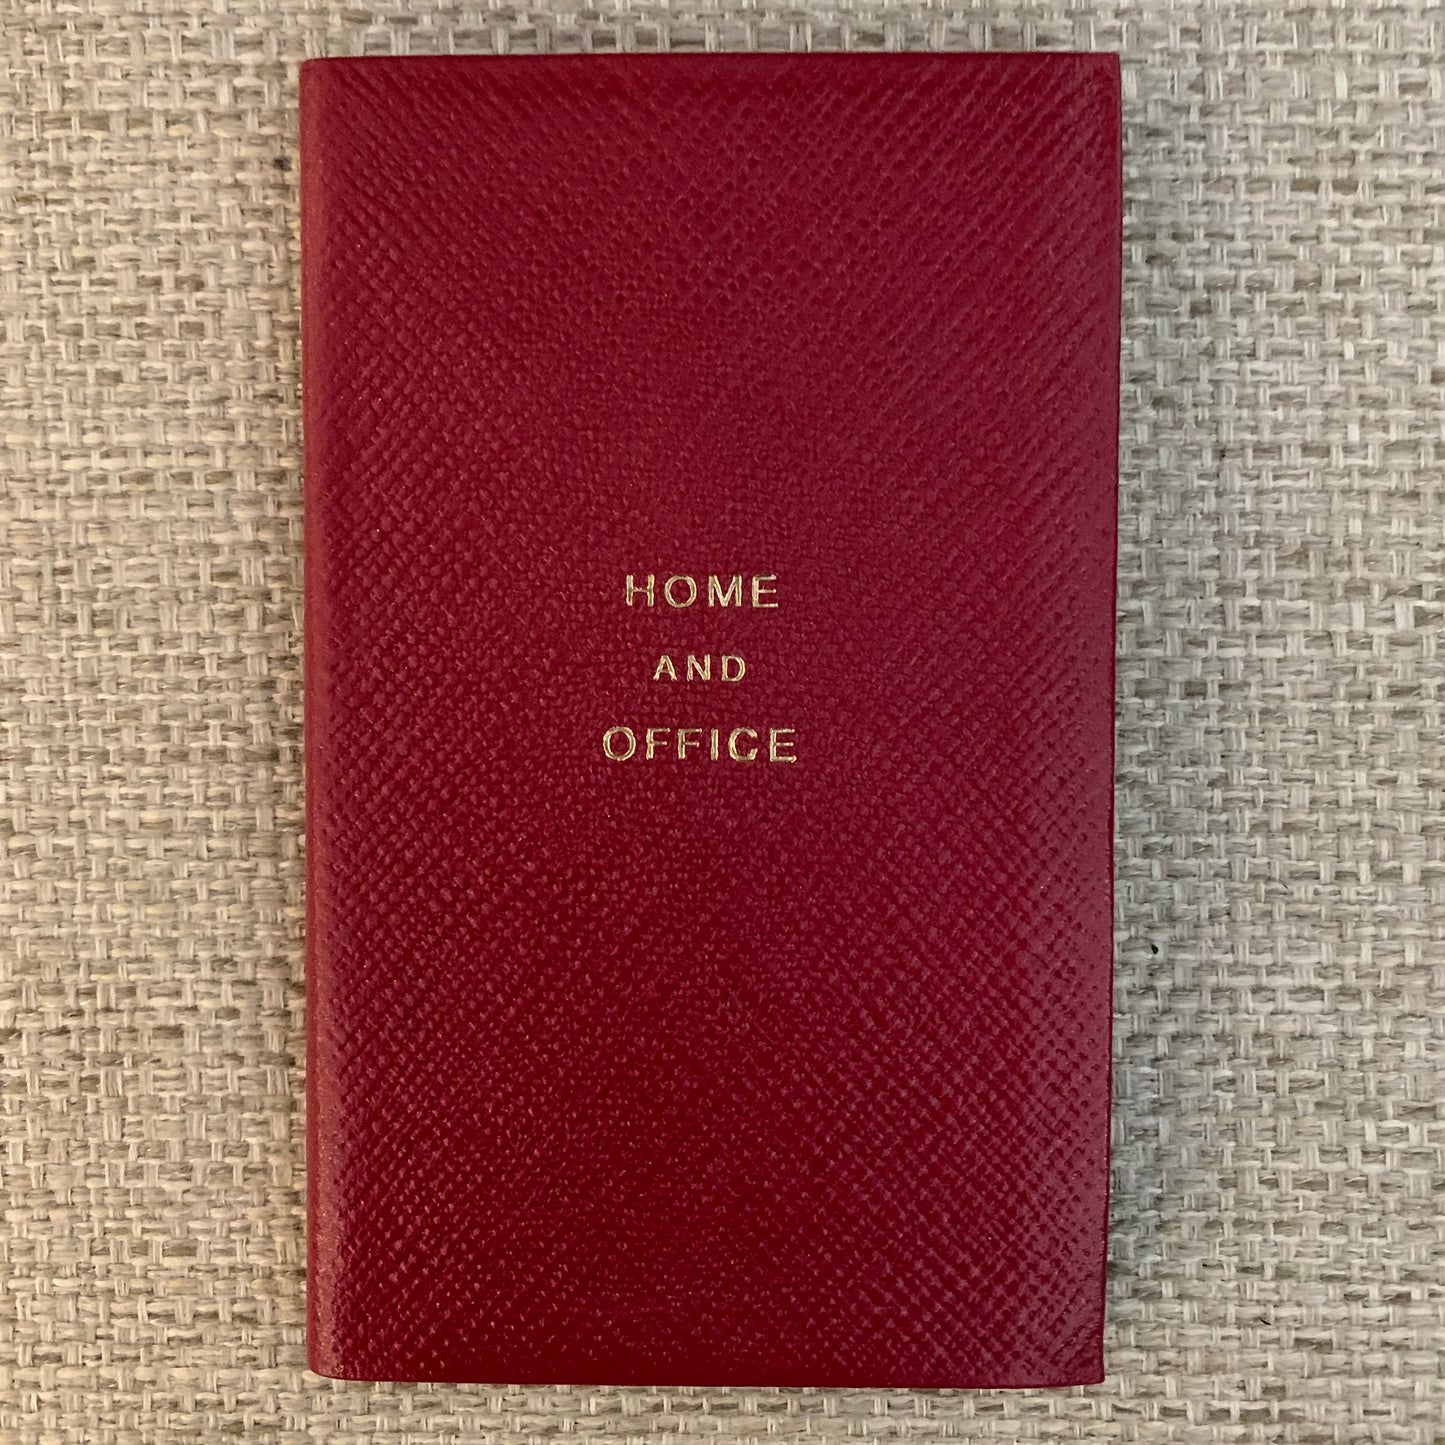 Address Book | Home and Abroad | Pocket Address Book | 5 by 3 inches | Cross Grain Leather | A53LHA